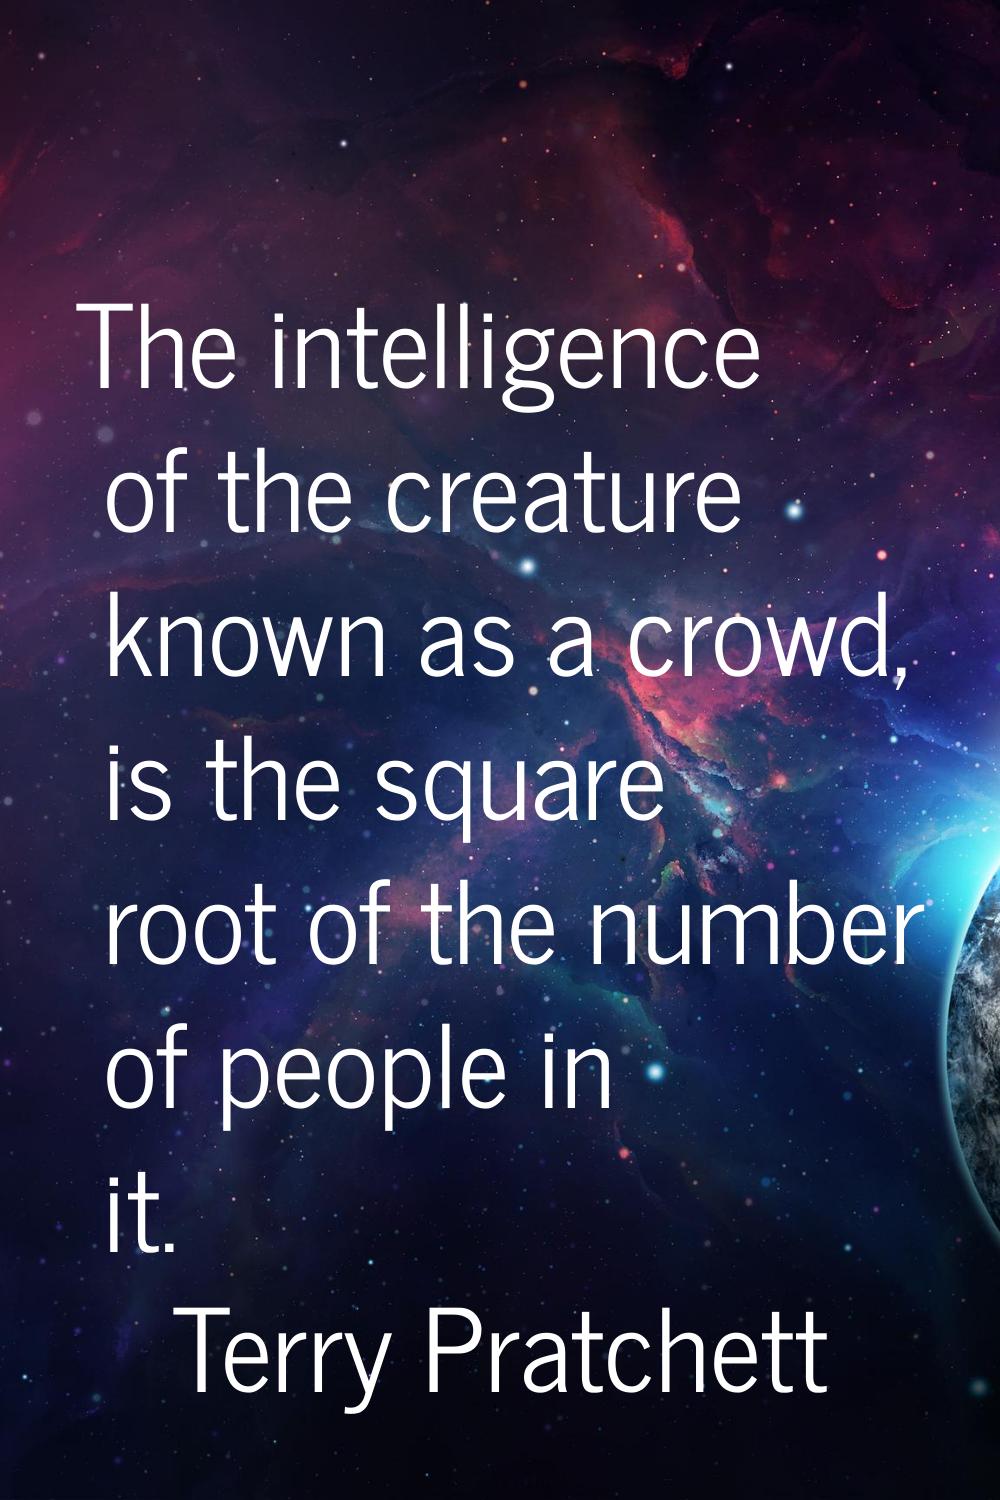 The intelligence of the creature known as a crowd, is the square root of the number of people in it